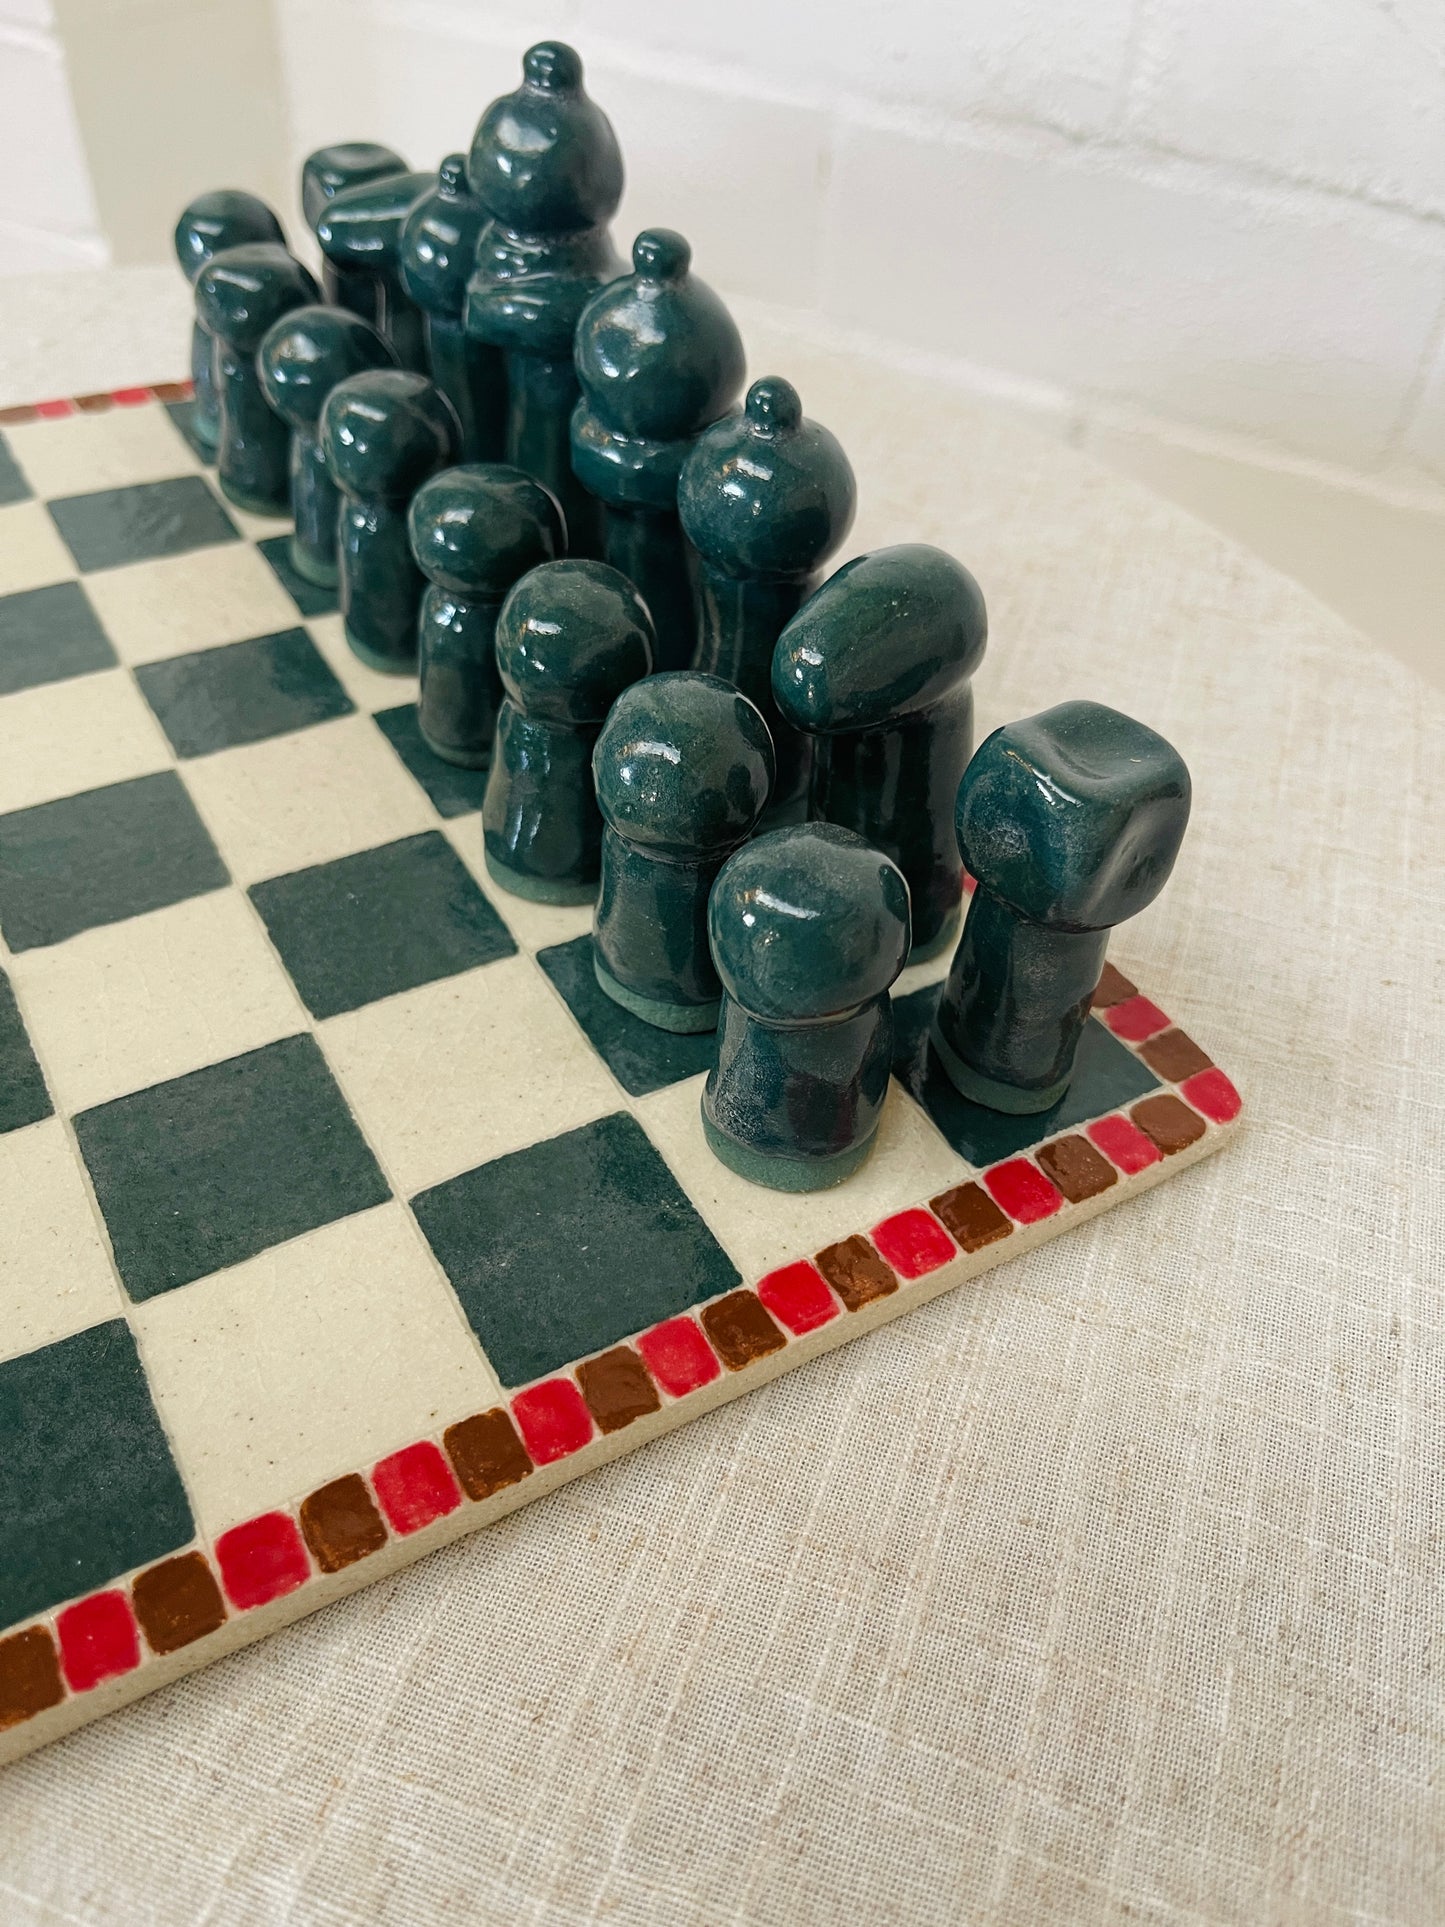 Hand Built Chess Board & Pieces